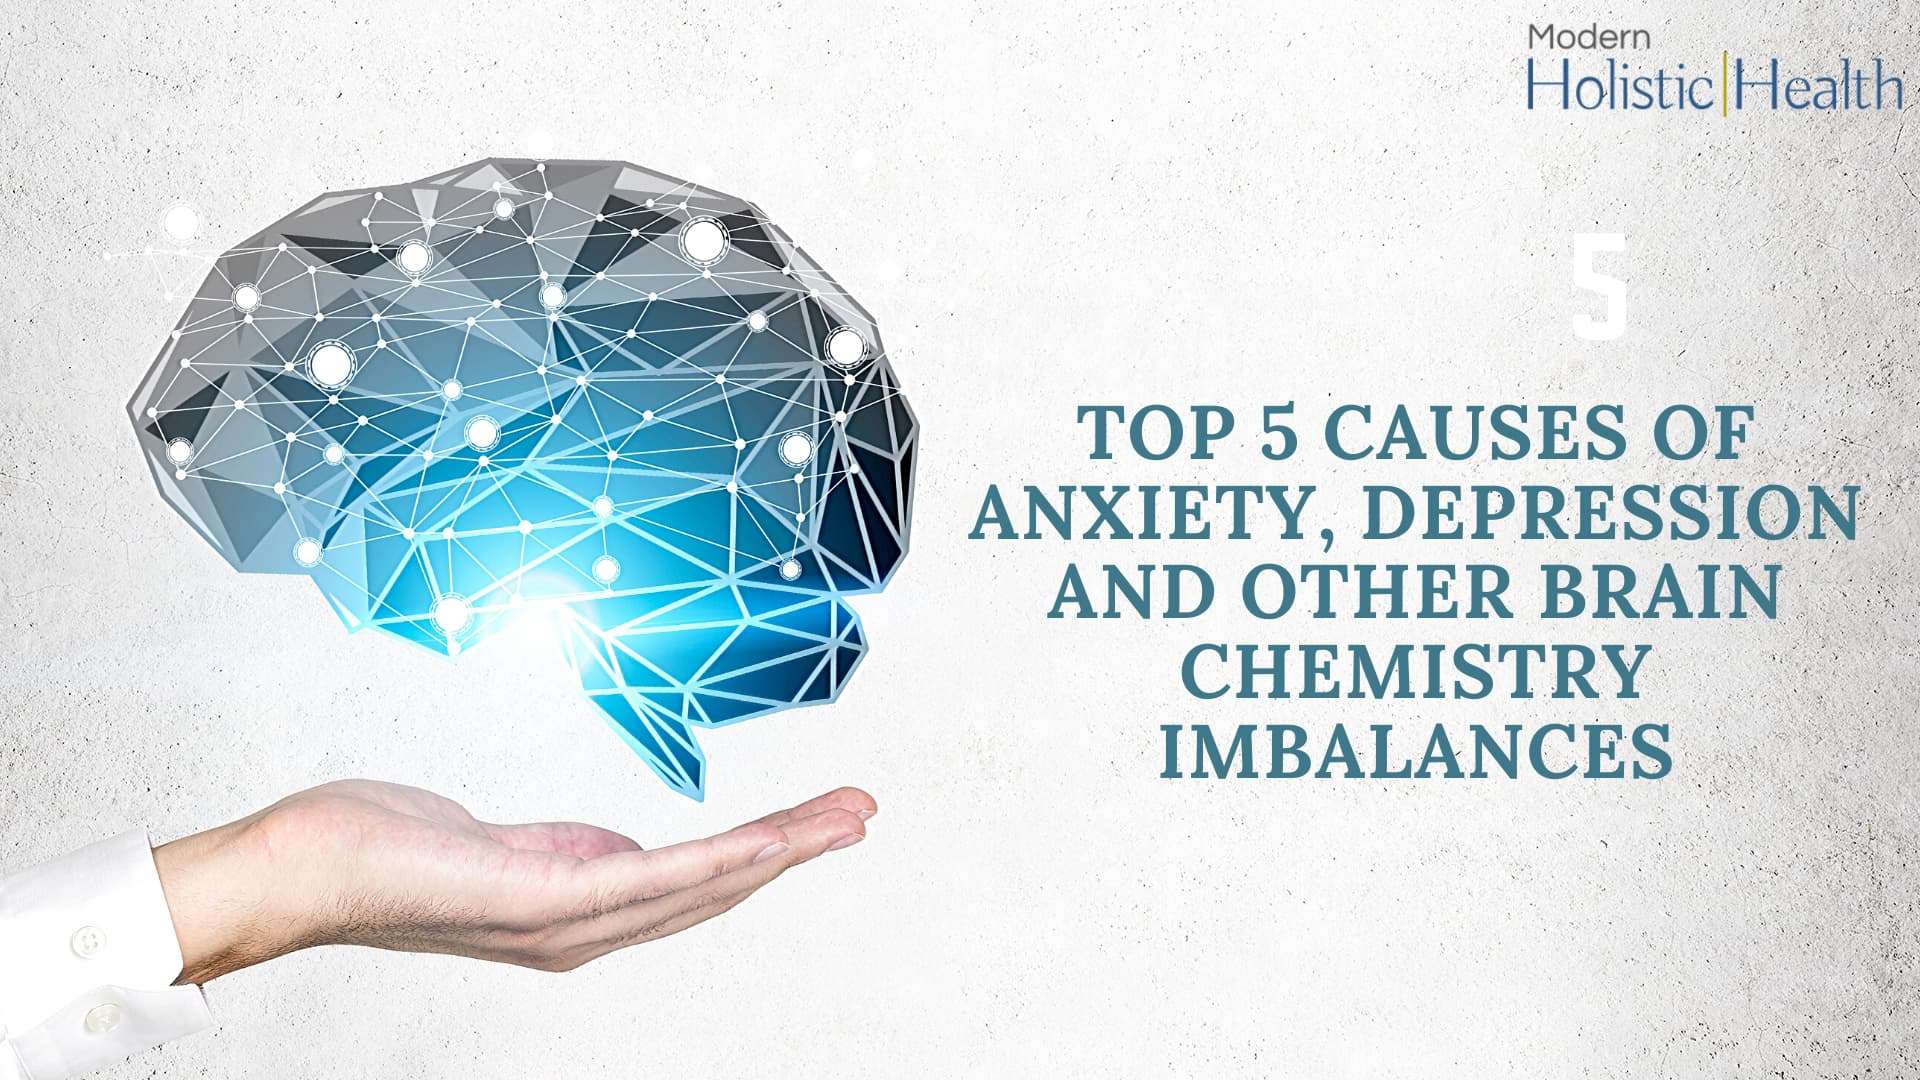 Top 5 Causes of Anxiety, Depression and other Brain Chemistry Imbalances